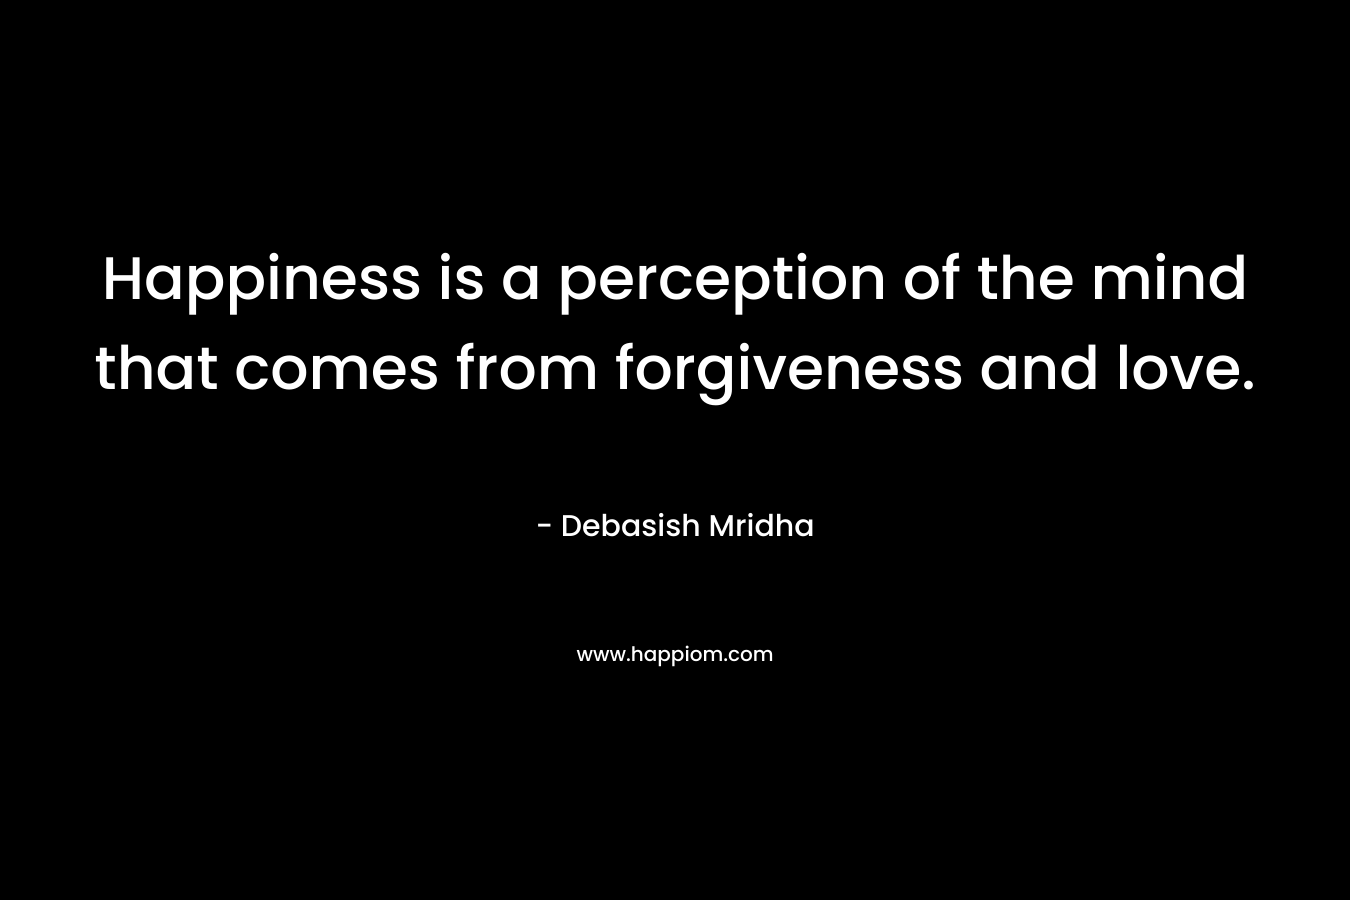 Happiness is a perception of the mind that comes from forgiveness and love.